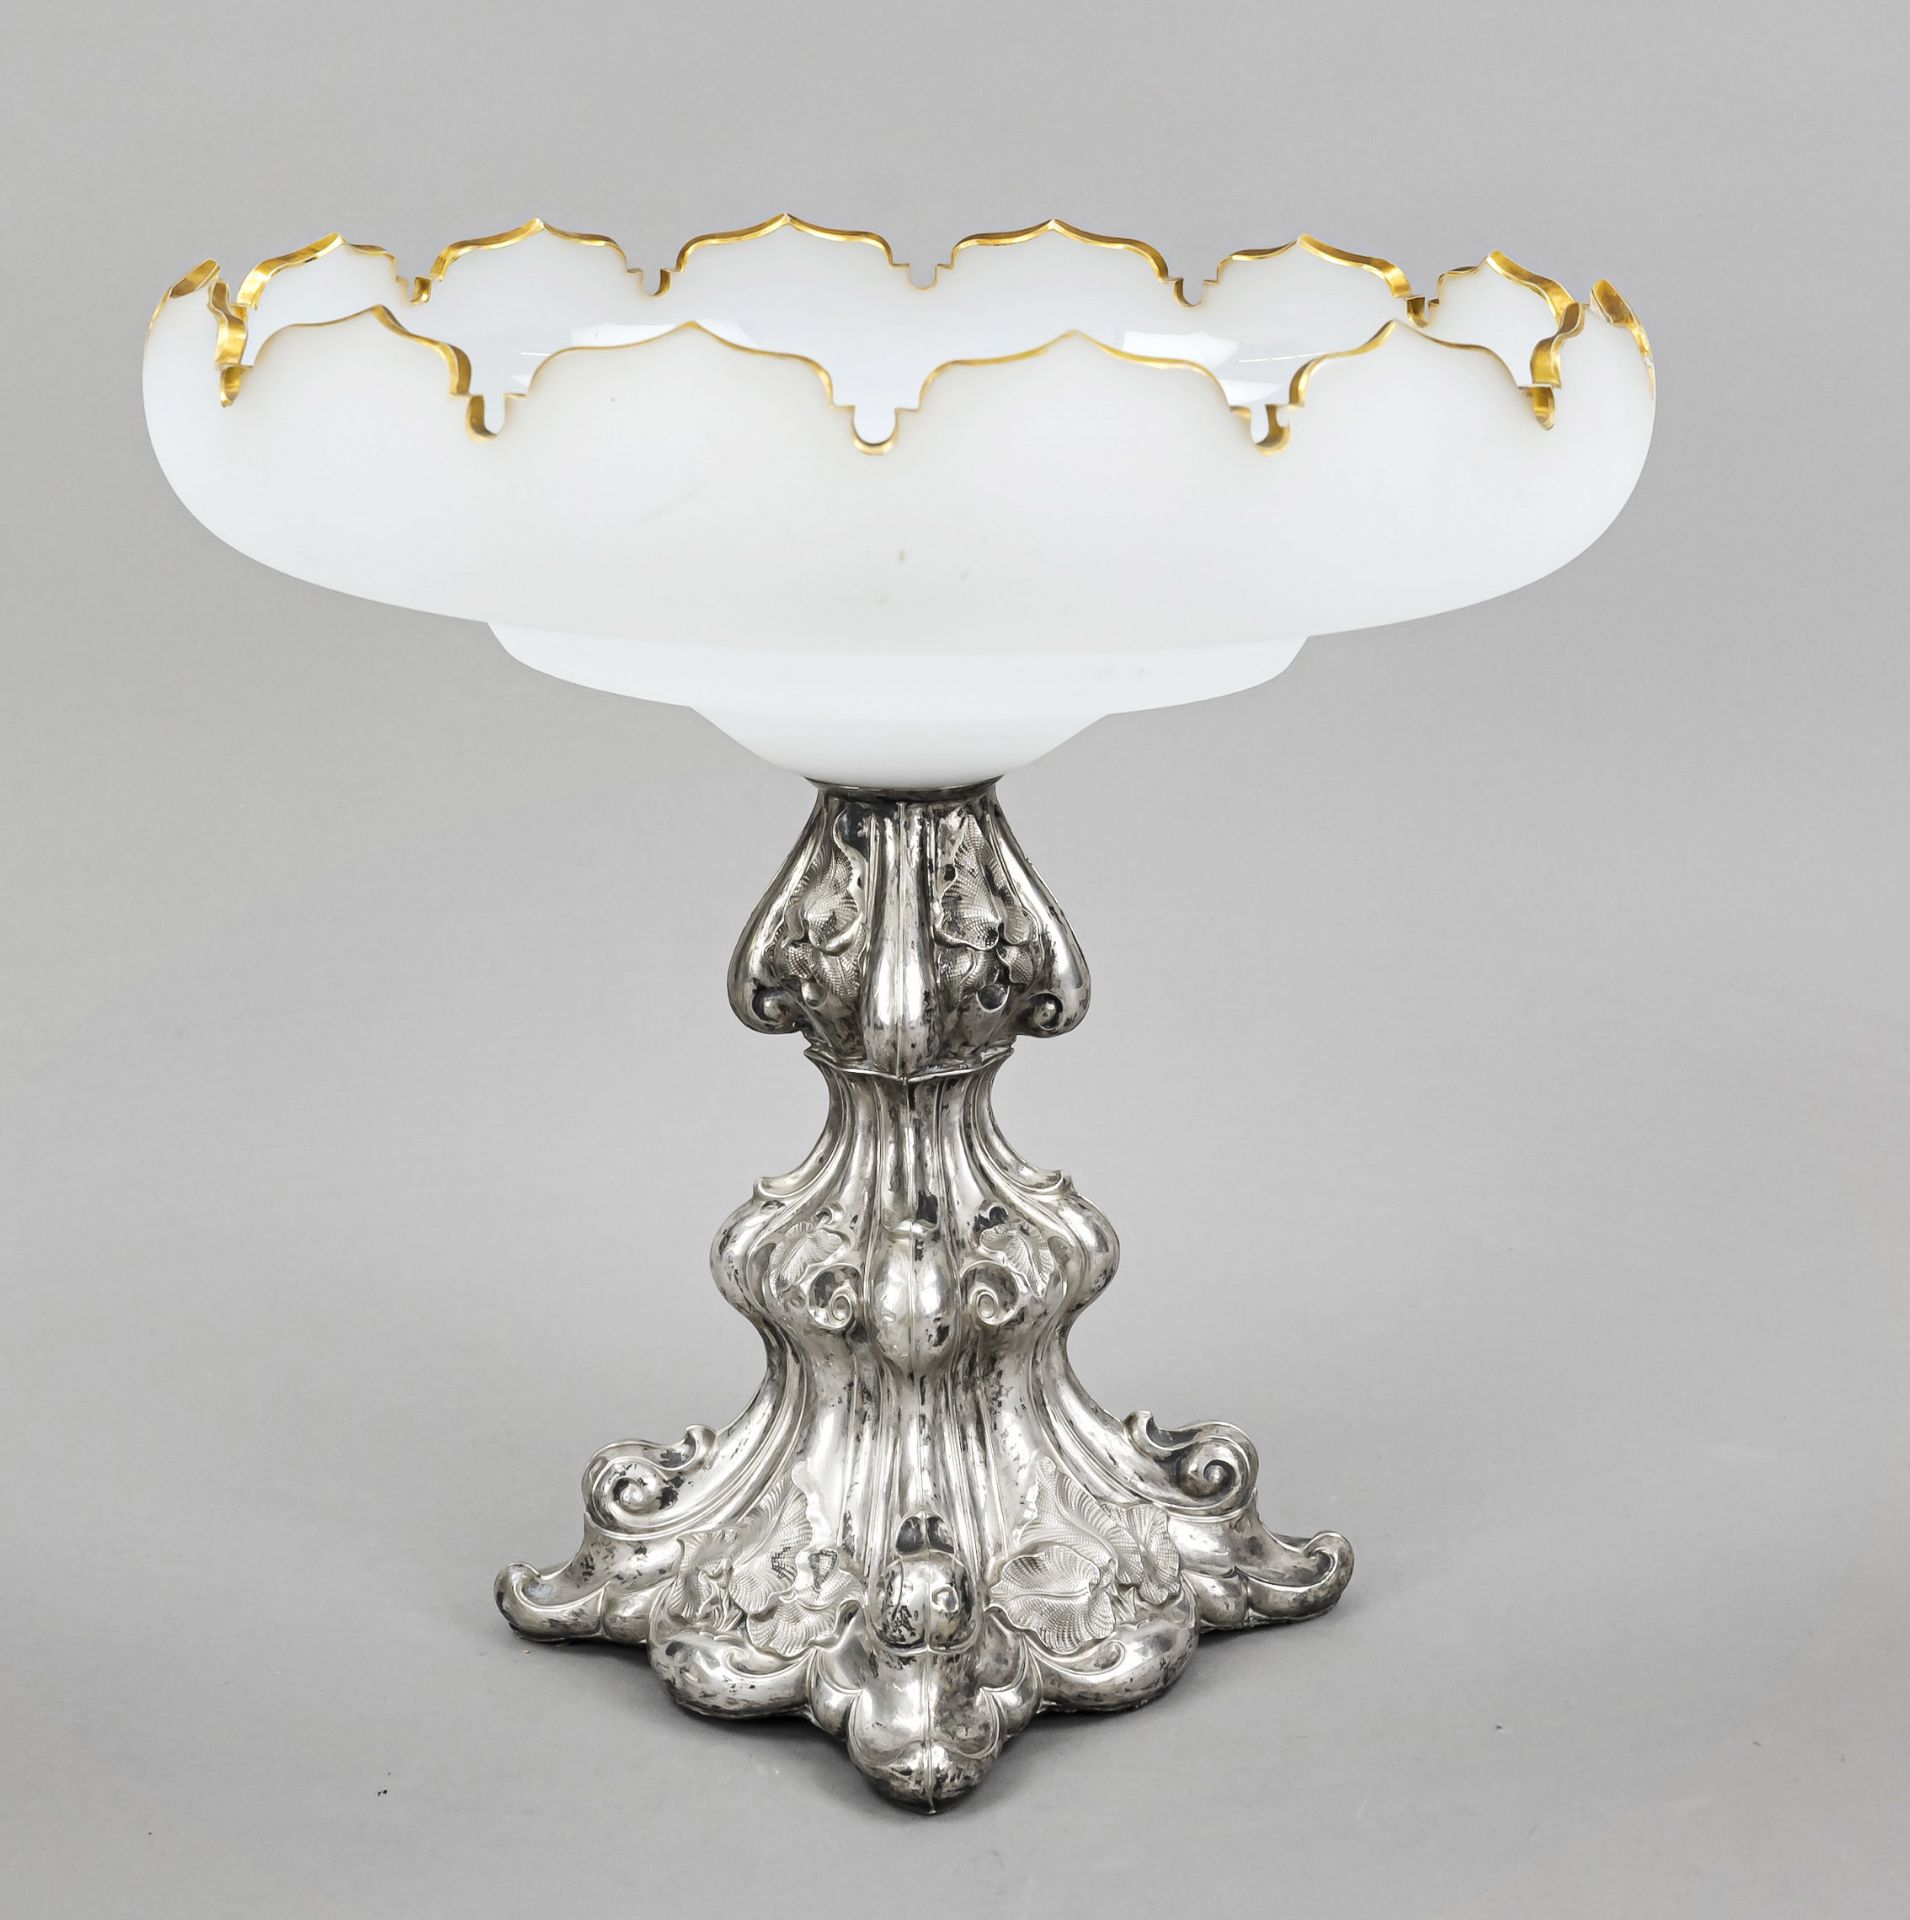 Large centerpiece, 19th century, with square, curved stand (filled), silver tested, domed and